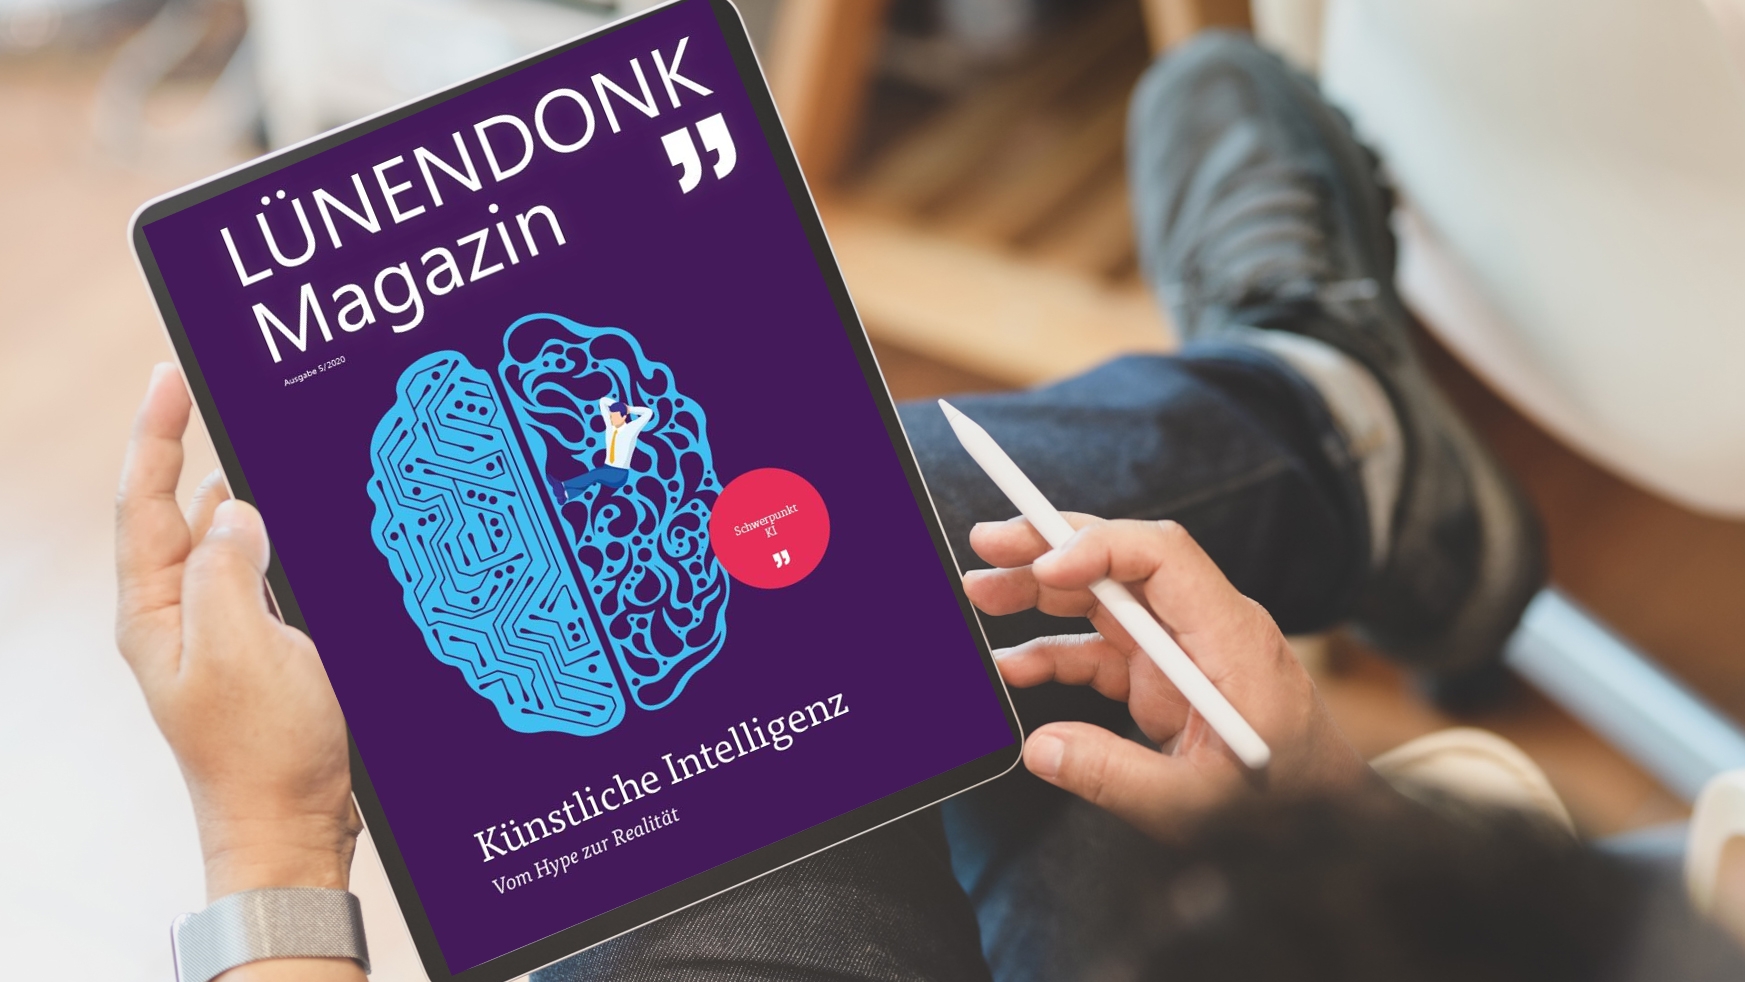 Lünendonk Magazine 2020, Artificial Intelligence - From Hype to Reality